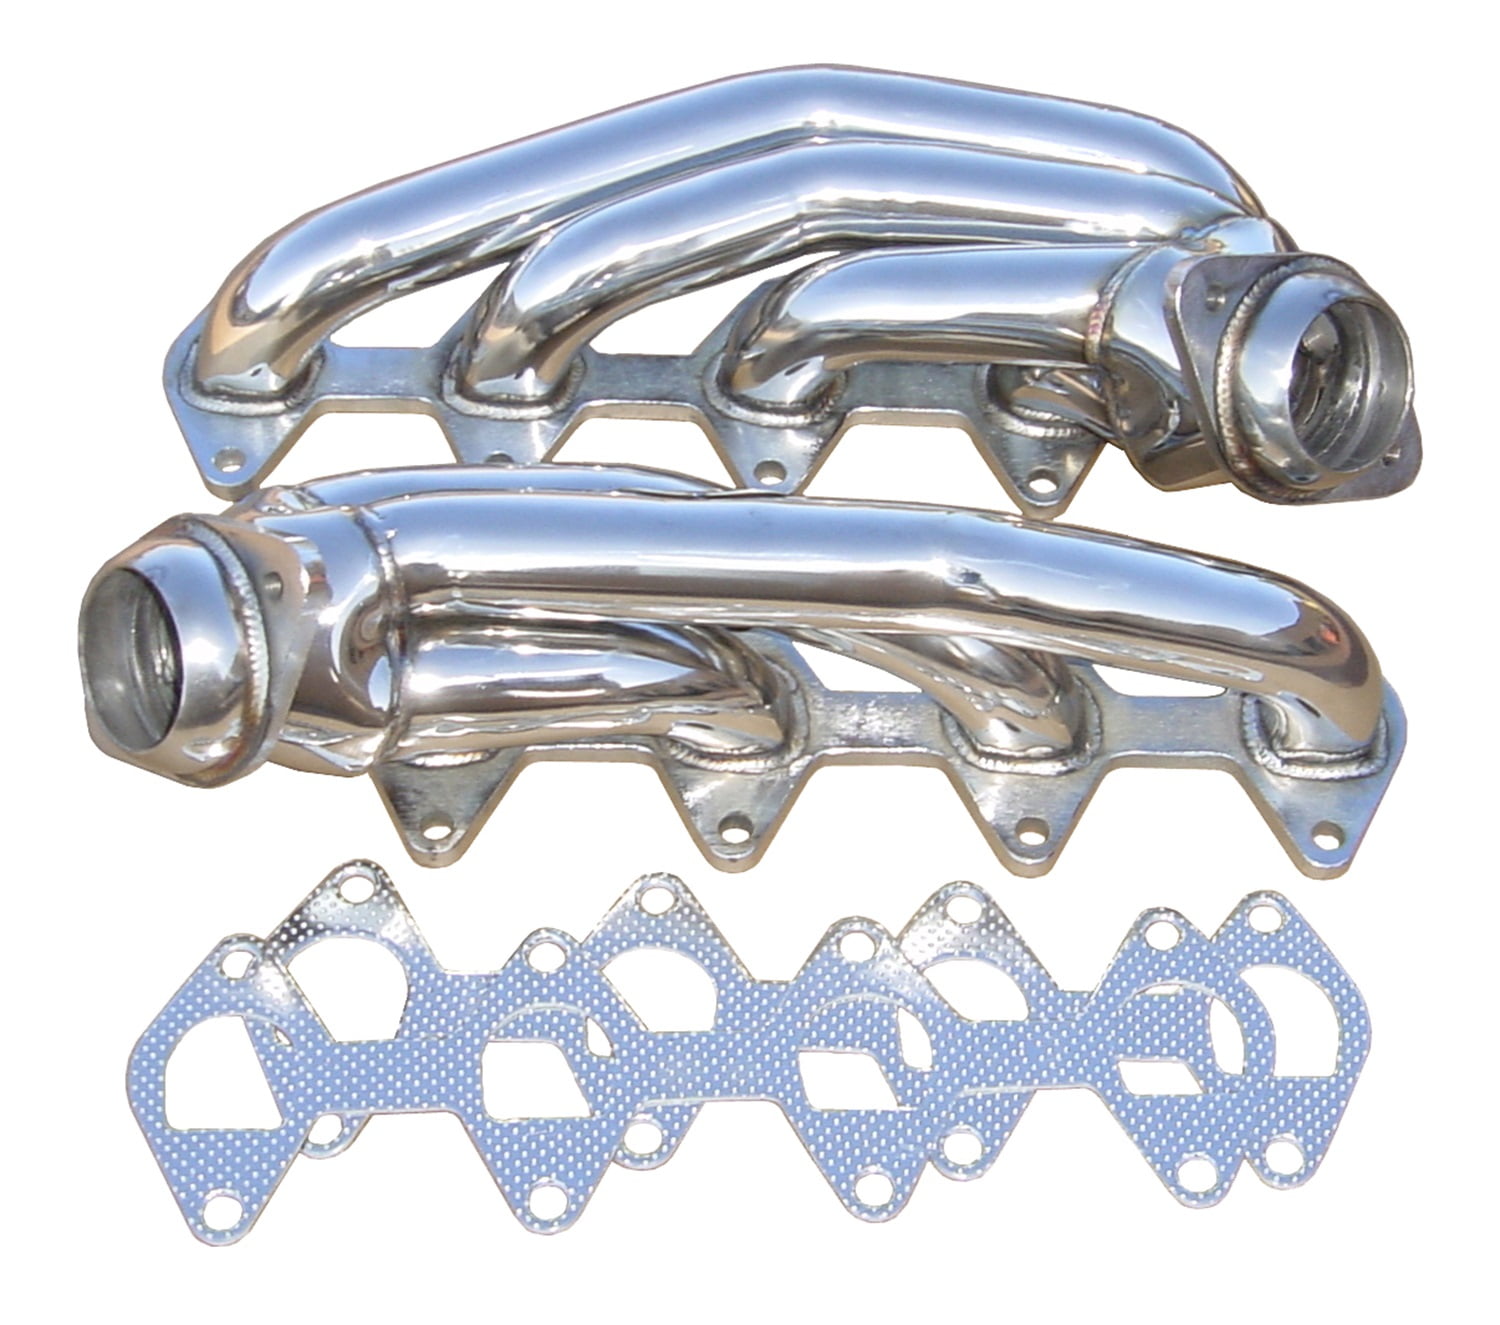 Pypes Performance Exhaust Hdr54s Shorty Exhaust Header Fits 05 10 Mustang